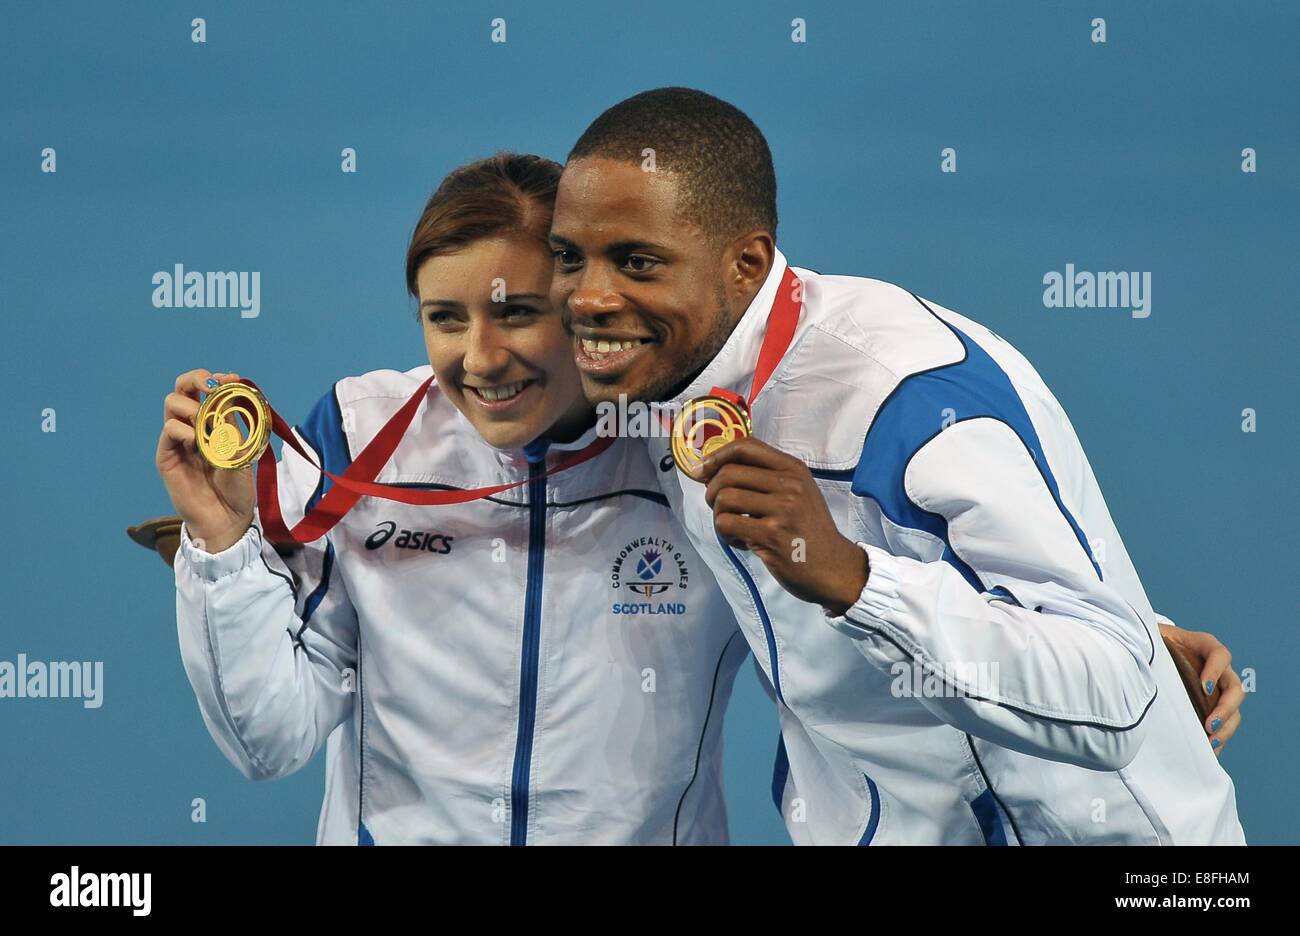 Libby Clegg (SCO) with her gold medal. Athletics - Hampden Park - Glasgow - UK - 28/07/2014 - Commonwealth Games - Glasgow 2014 Stock Photo